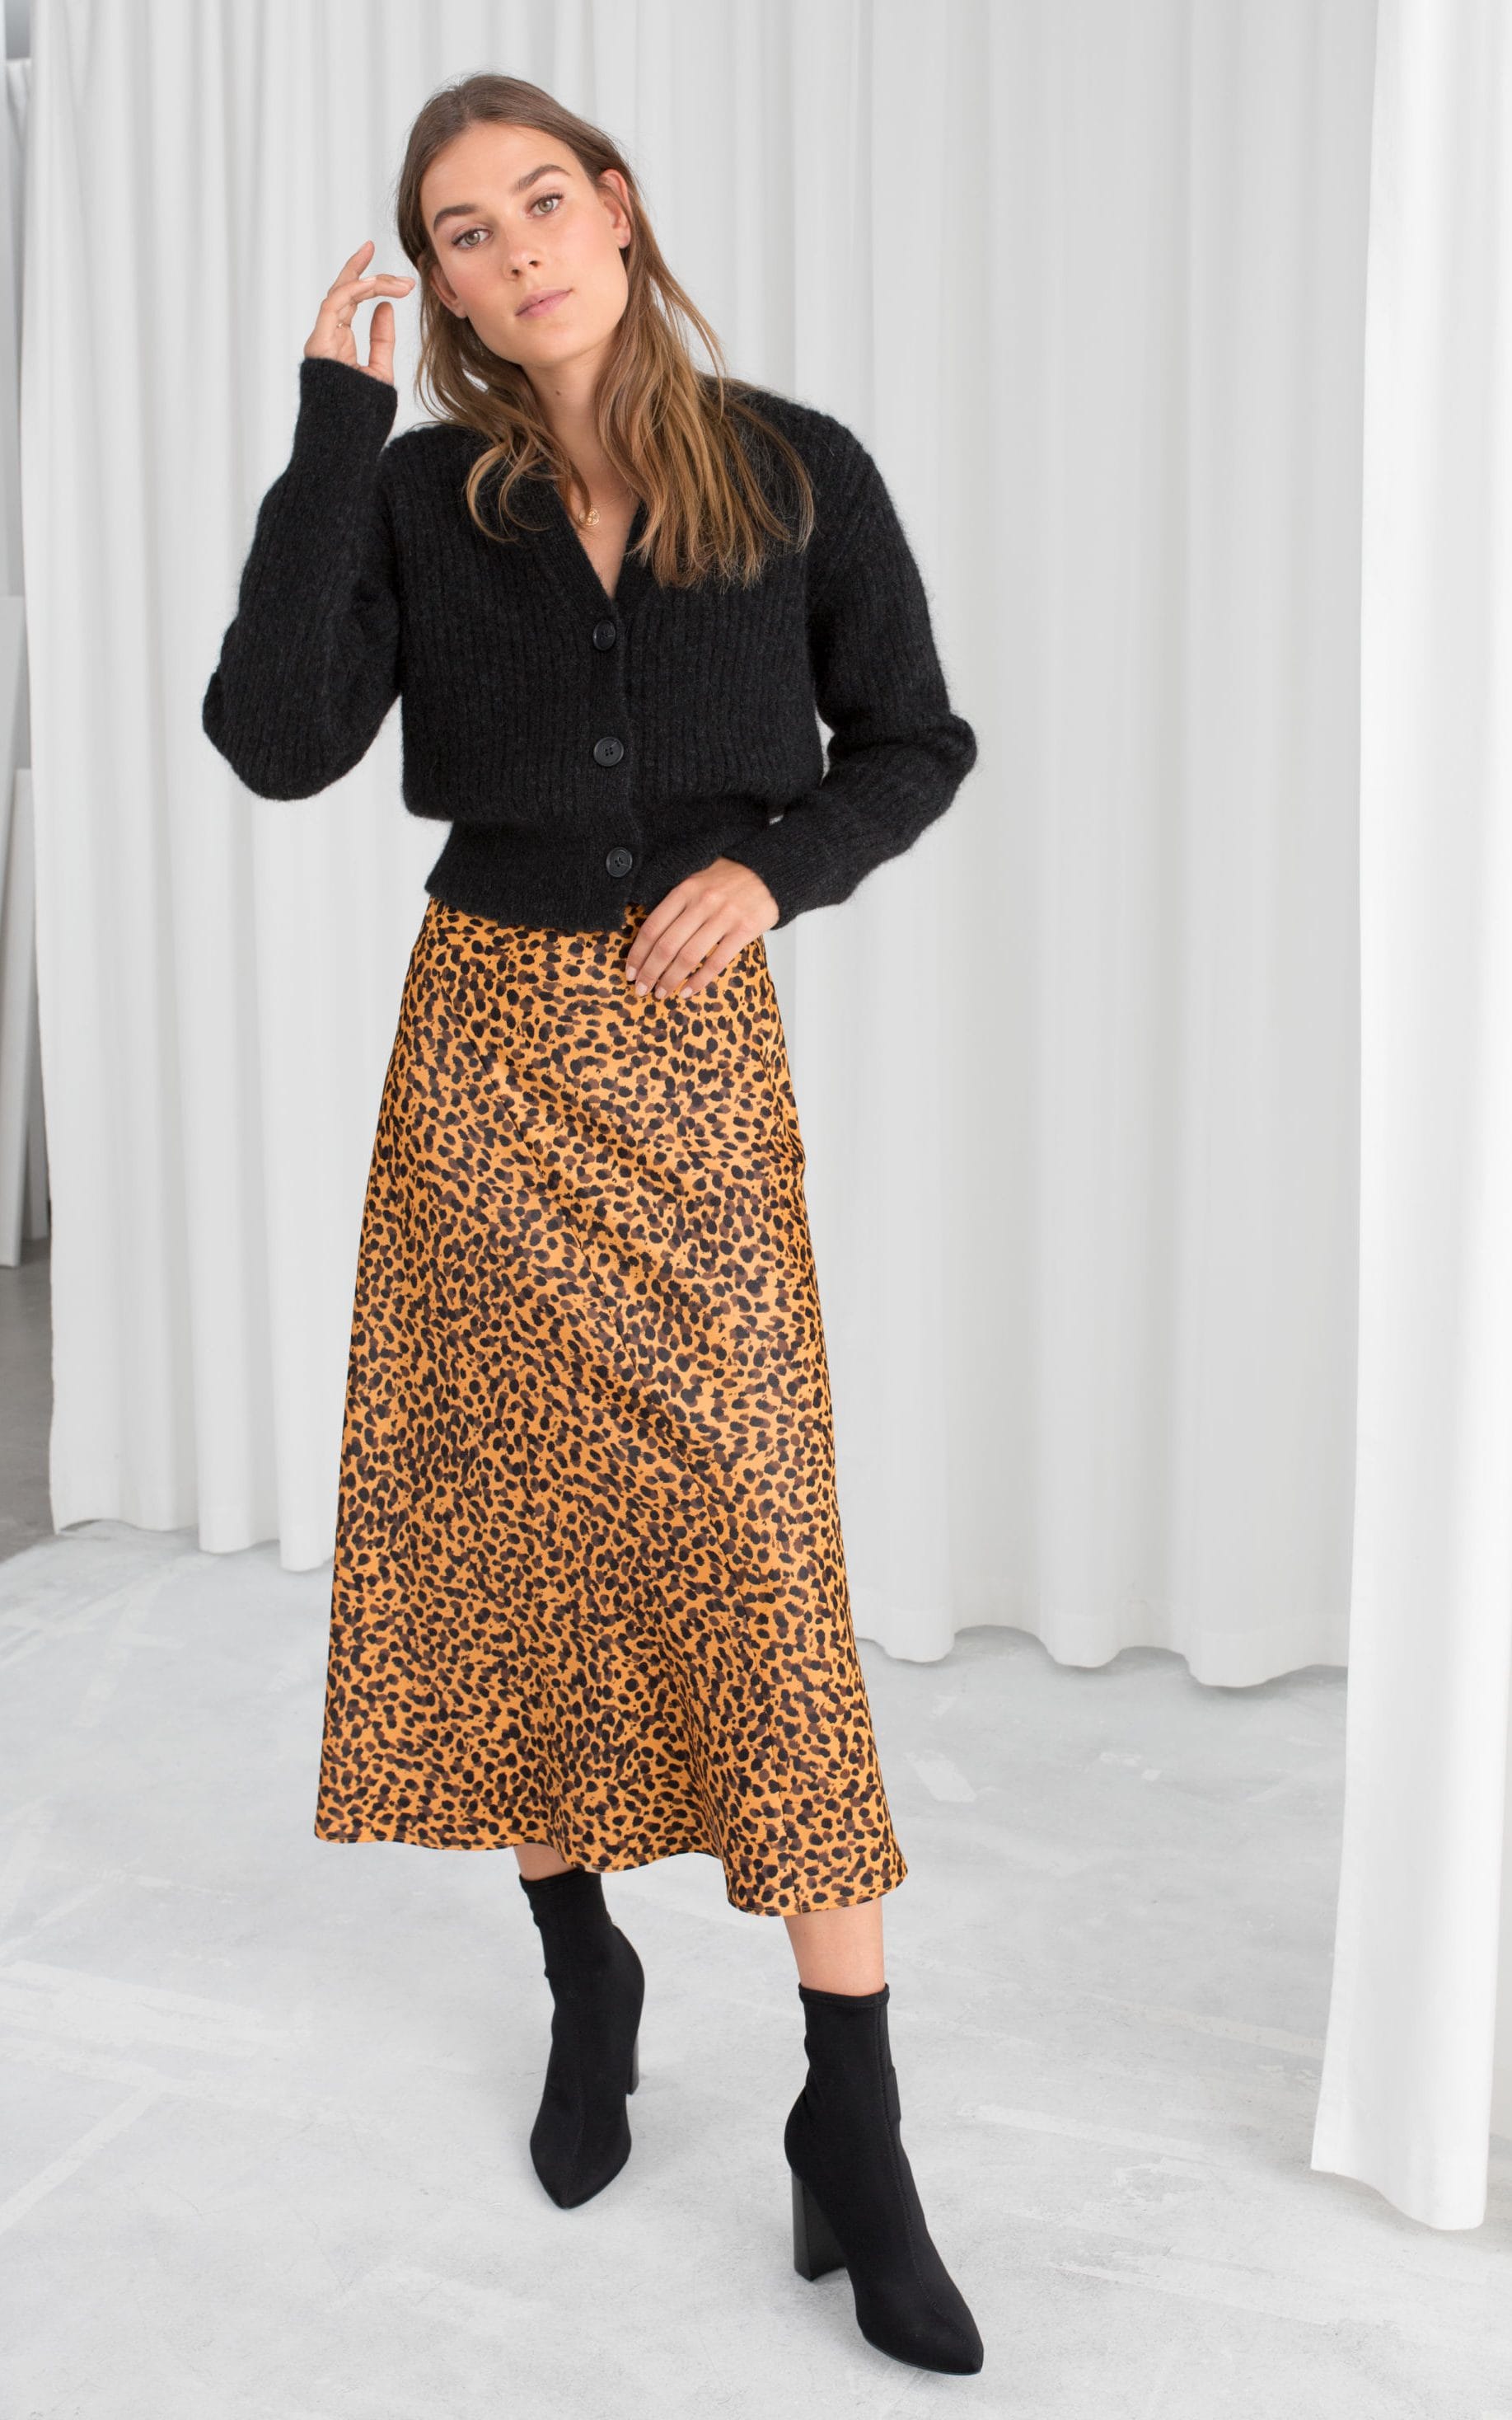 How to wear statement skirts at work